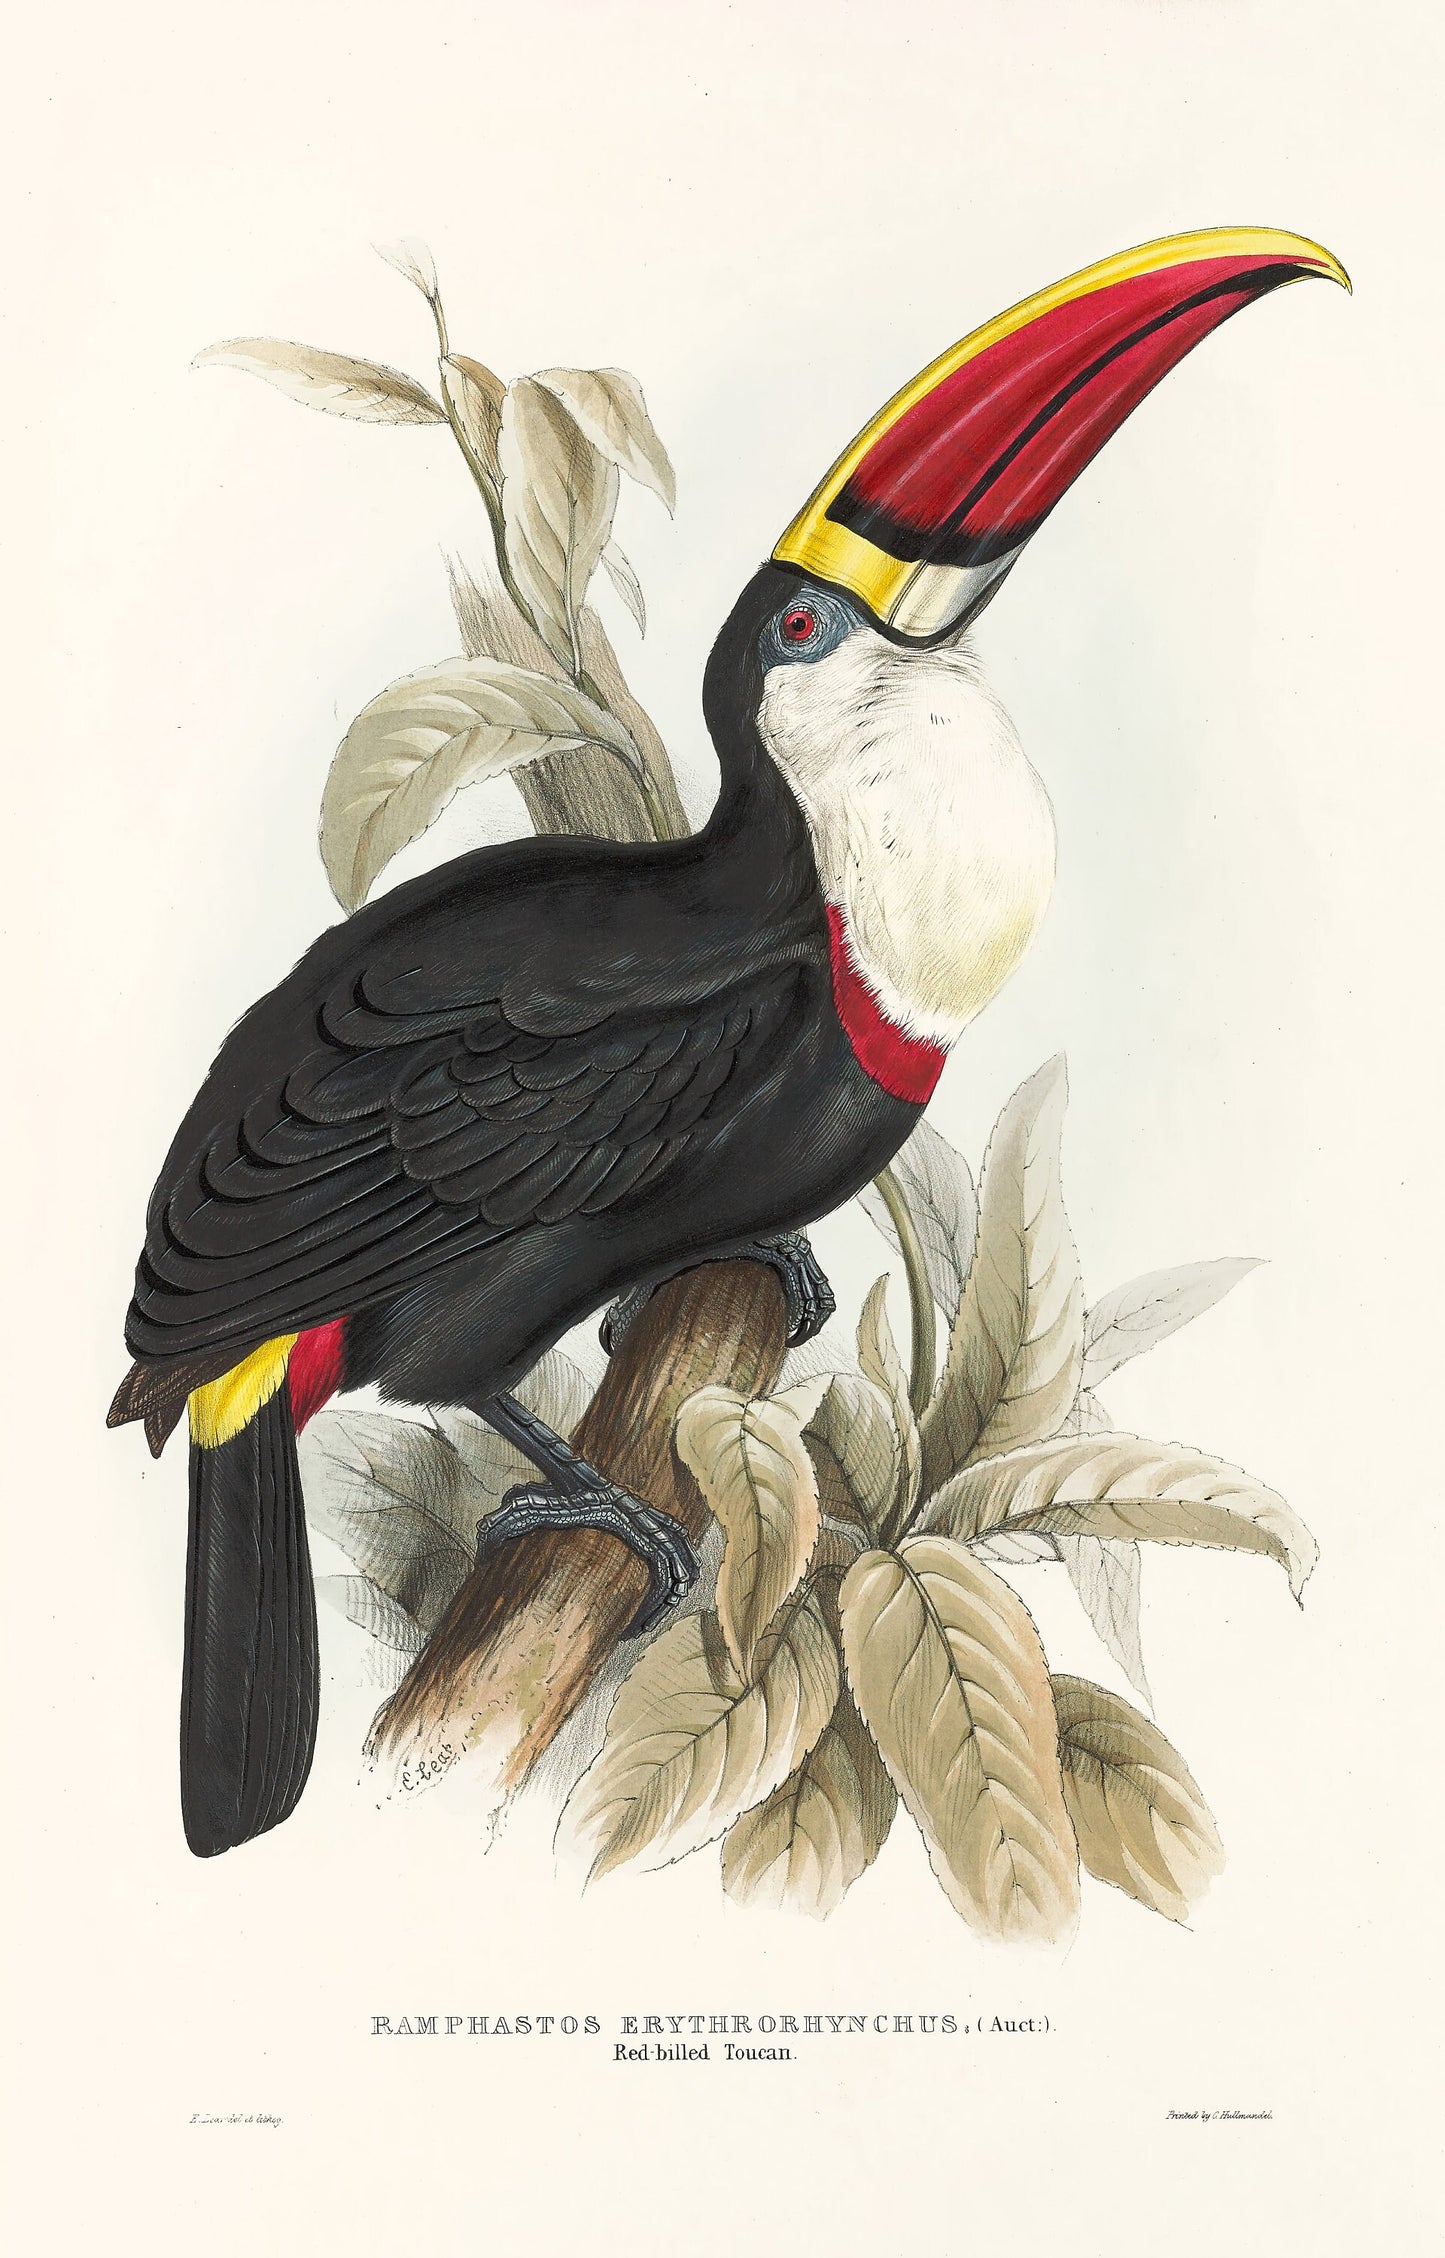 John Gould A Monograph of the Ramphastidae Toucans [33 Images]